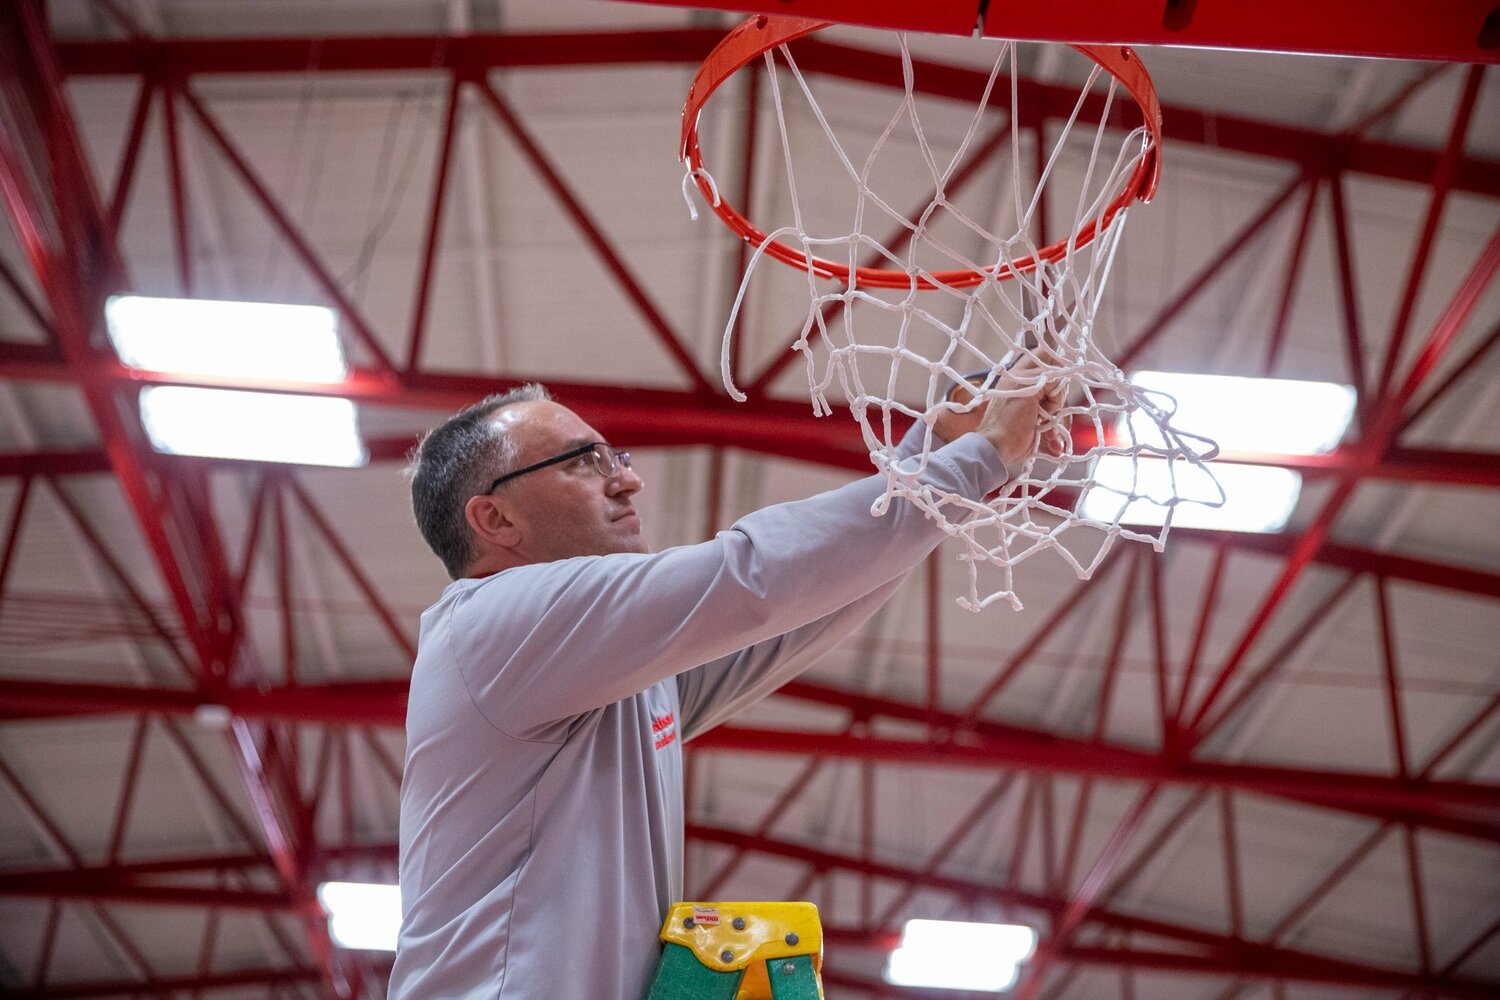 Wabash head coach Kyle Brumett cuts down the nets at Chadwick court as his Wabash College Little Giants secured the North Coast Athletic Conference regular season title with a 91-81 win over Wooster. The win for Brumett was also his 300th career win.